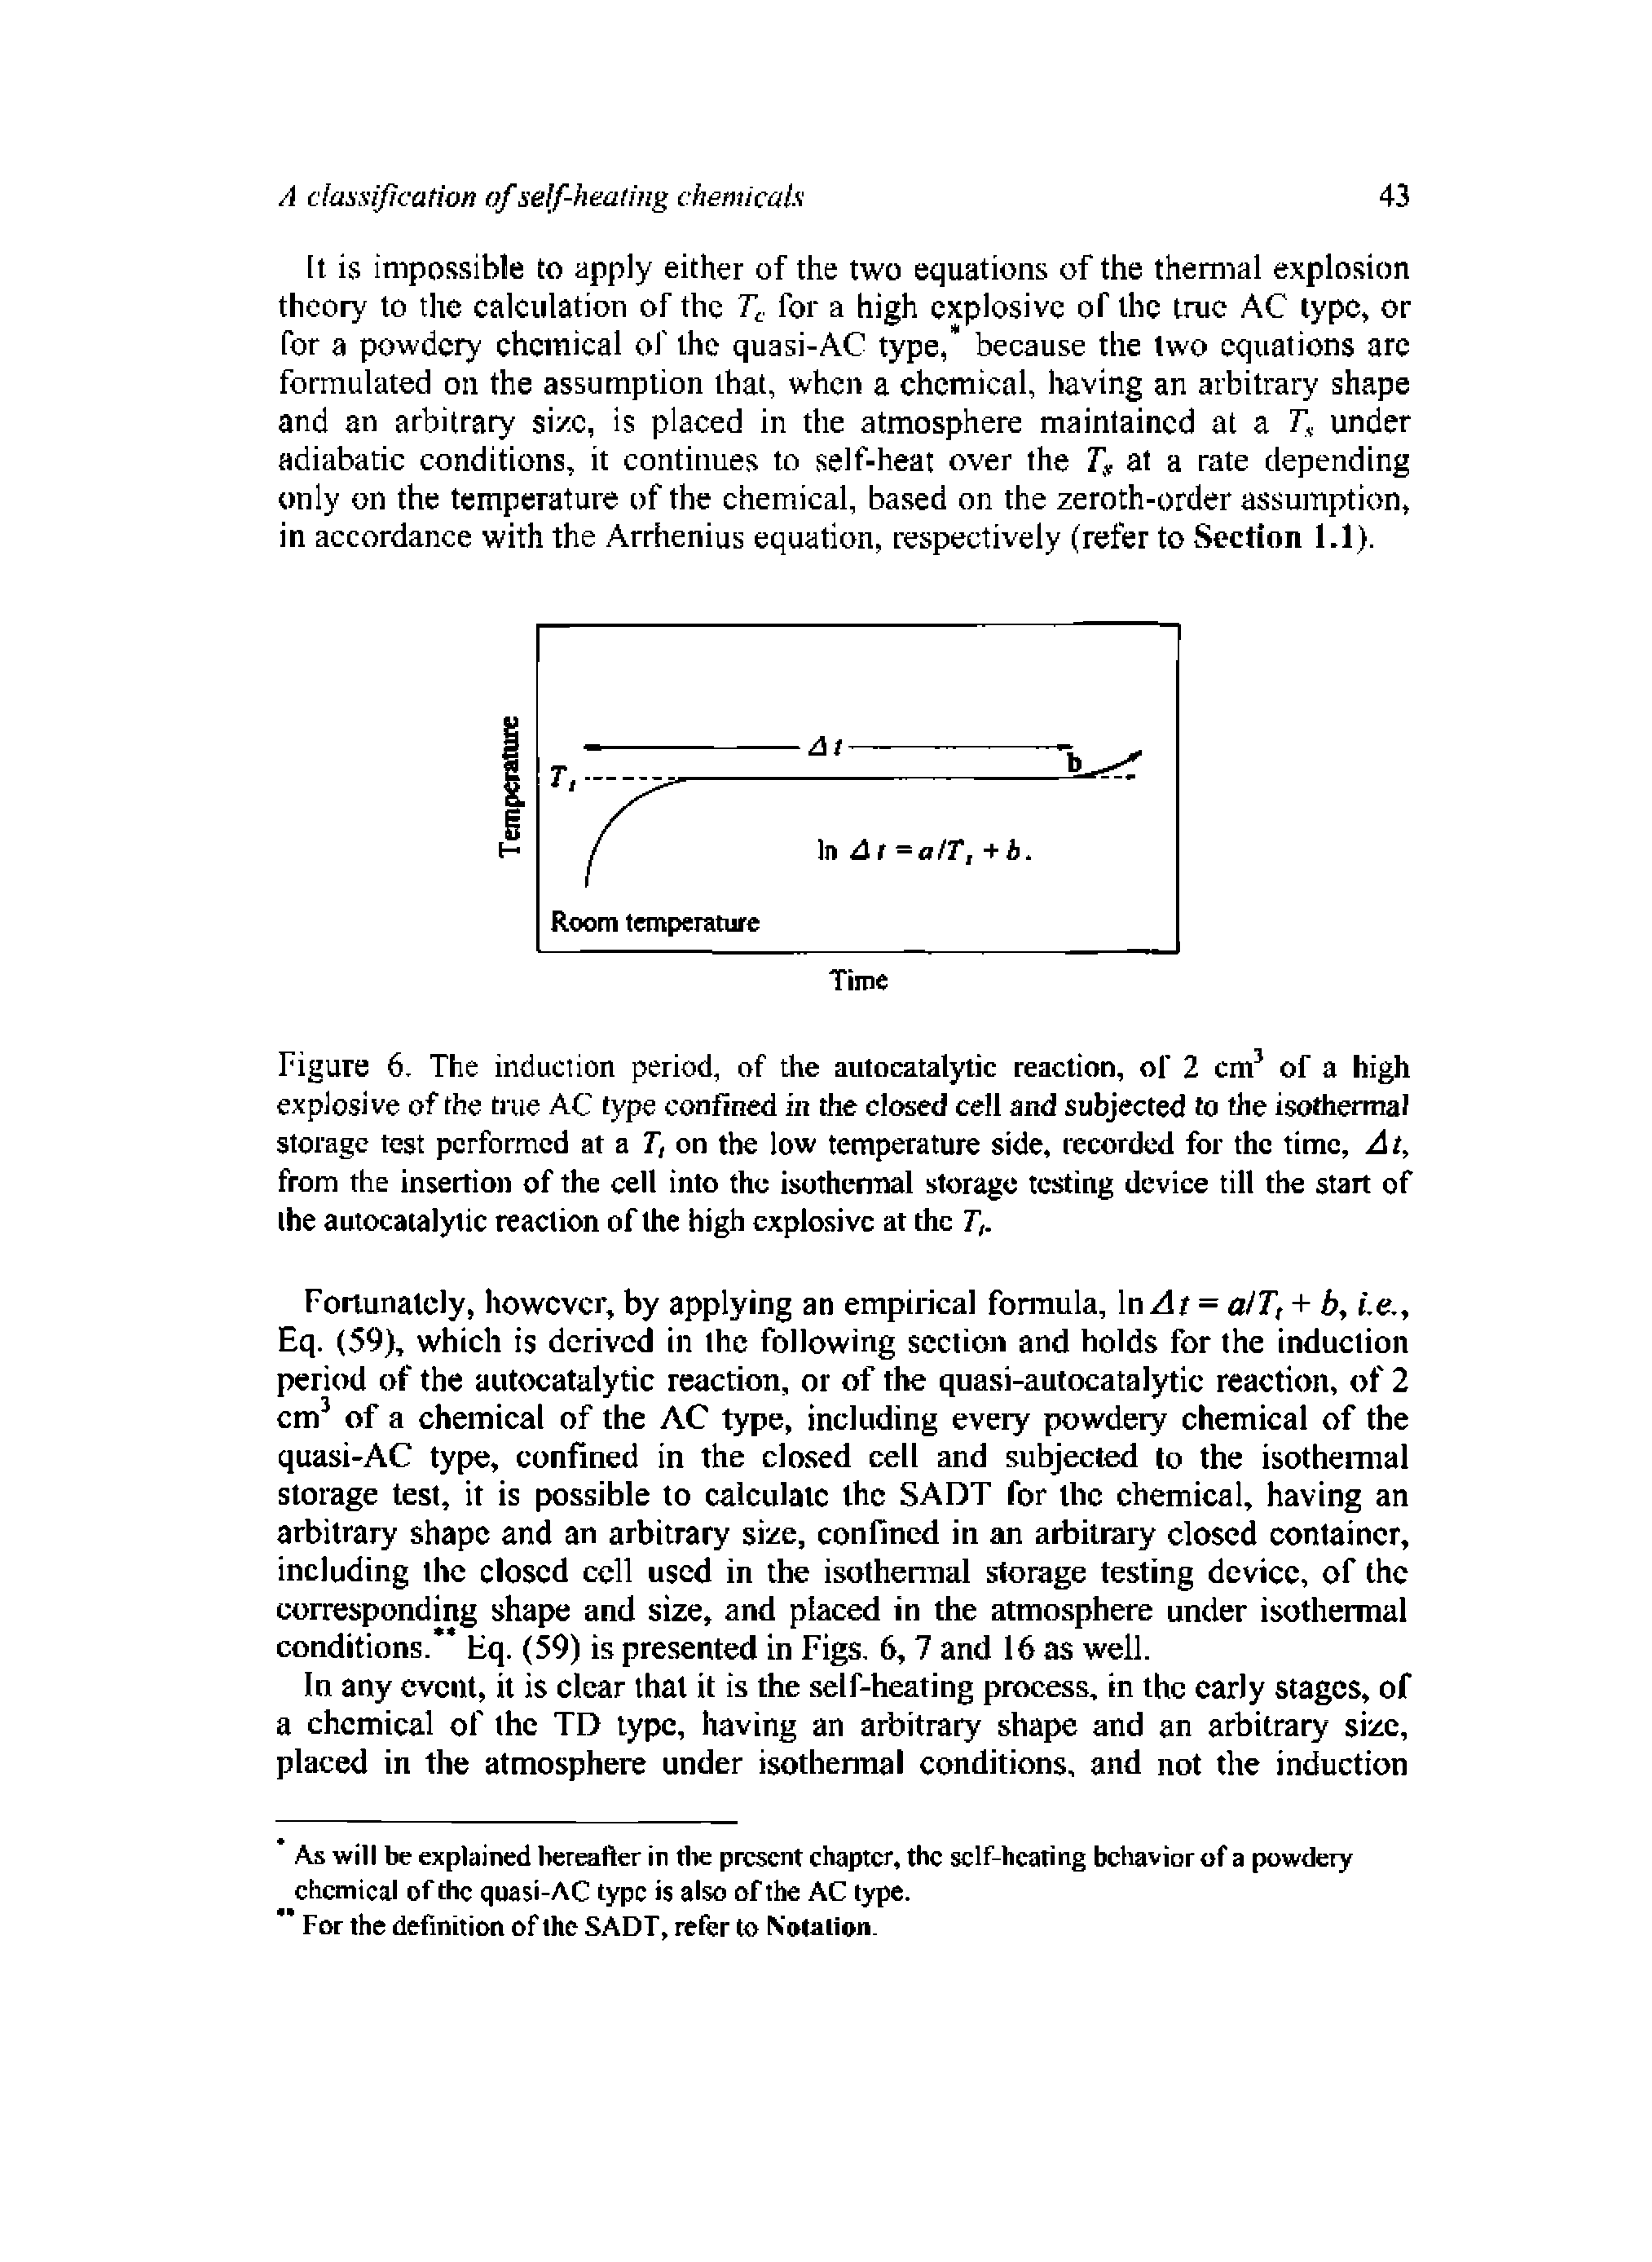 Figure 6, The induction period, of the aiitocatalytic reaction, of 2 cm of a high explosive of the tiue AC type confined in the closed cell and subjected to the isothermal storage test performed at a T, on the low temperature side, recorded for the time, At, from the insertion of the cell into the isothennal storage testing device till the start of the autocaialylic reaction of the high explosive at the T,.